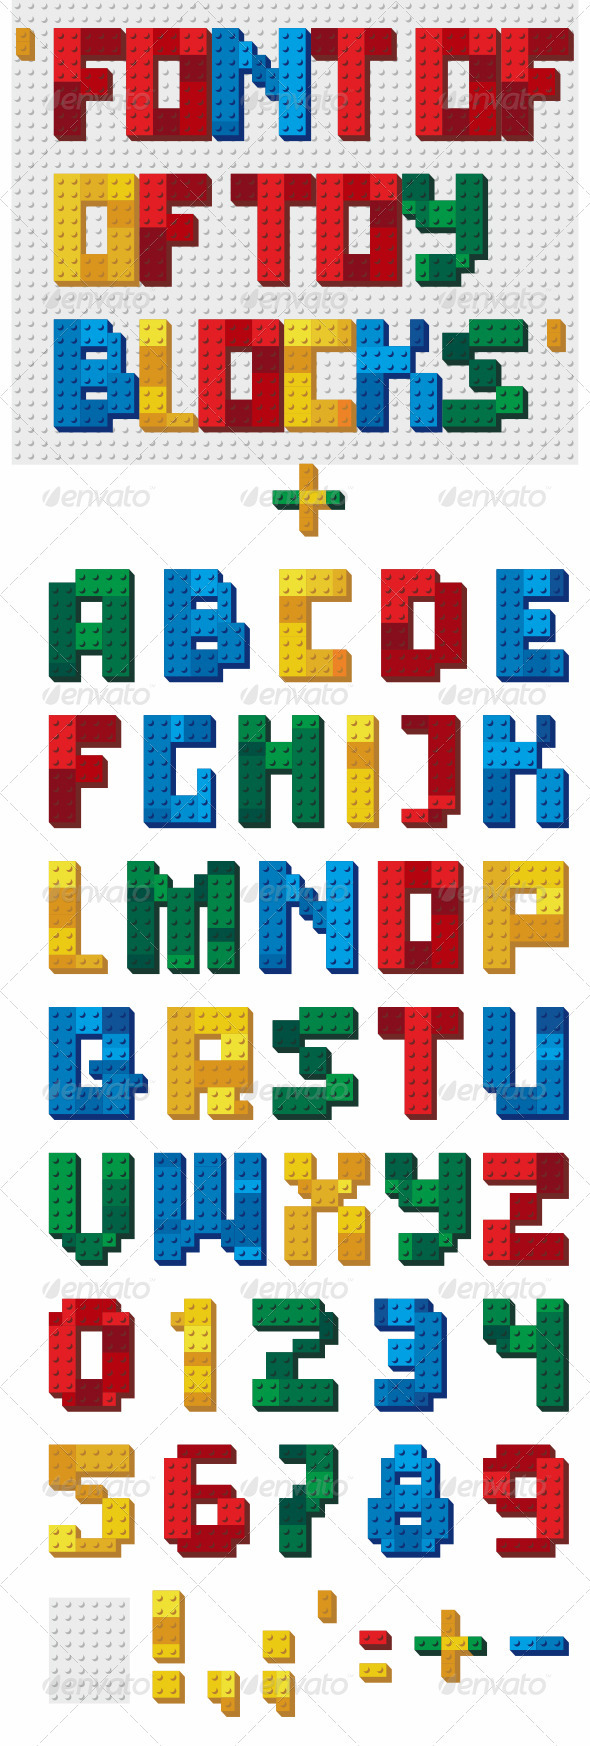 Font Of Toy Blocks By EGR0CK GraphicRiver